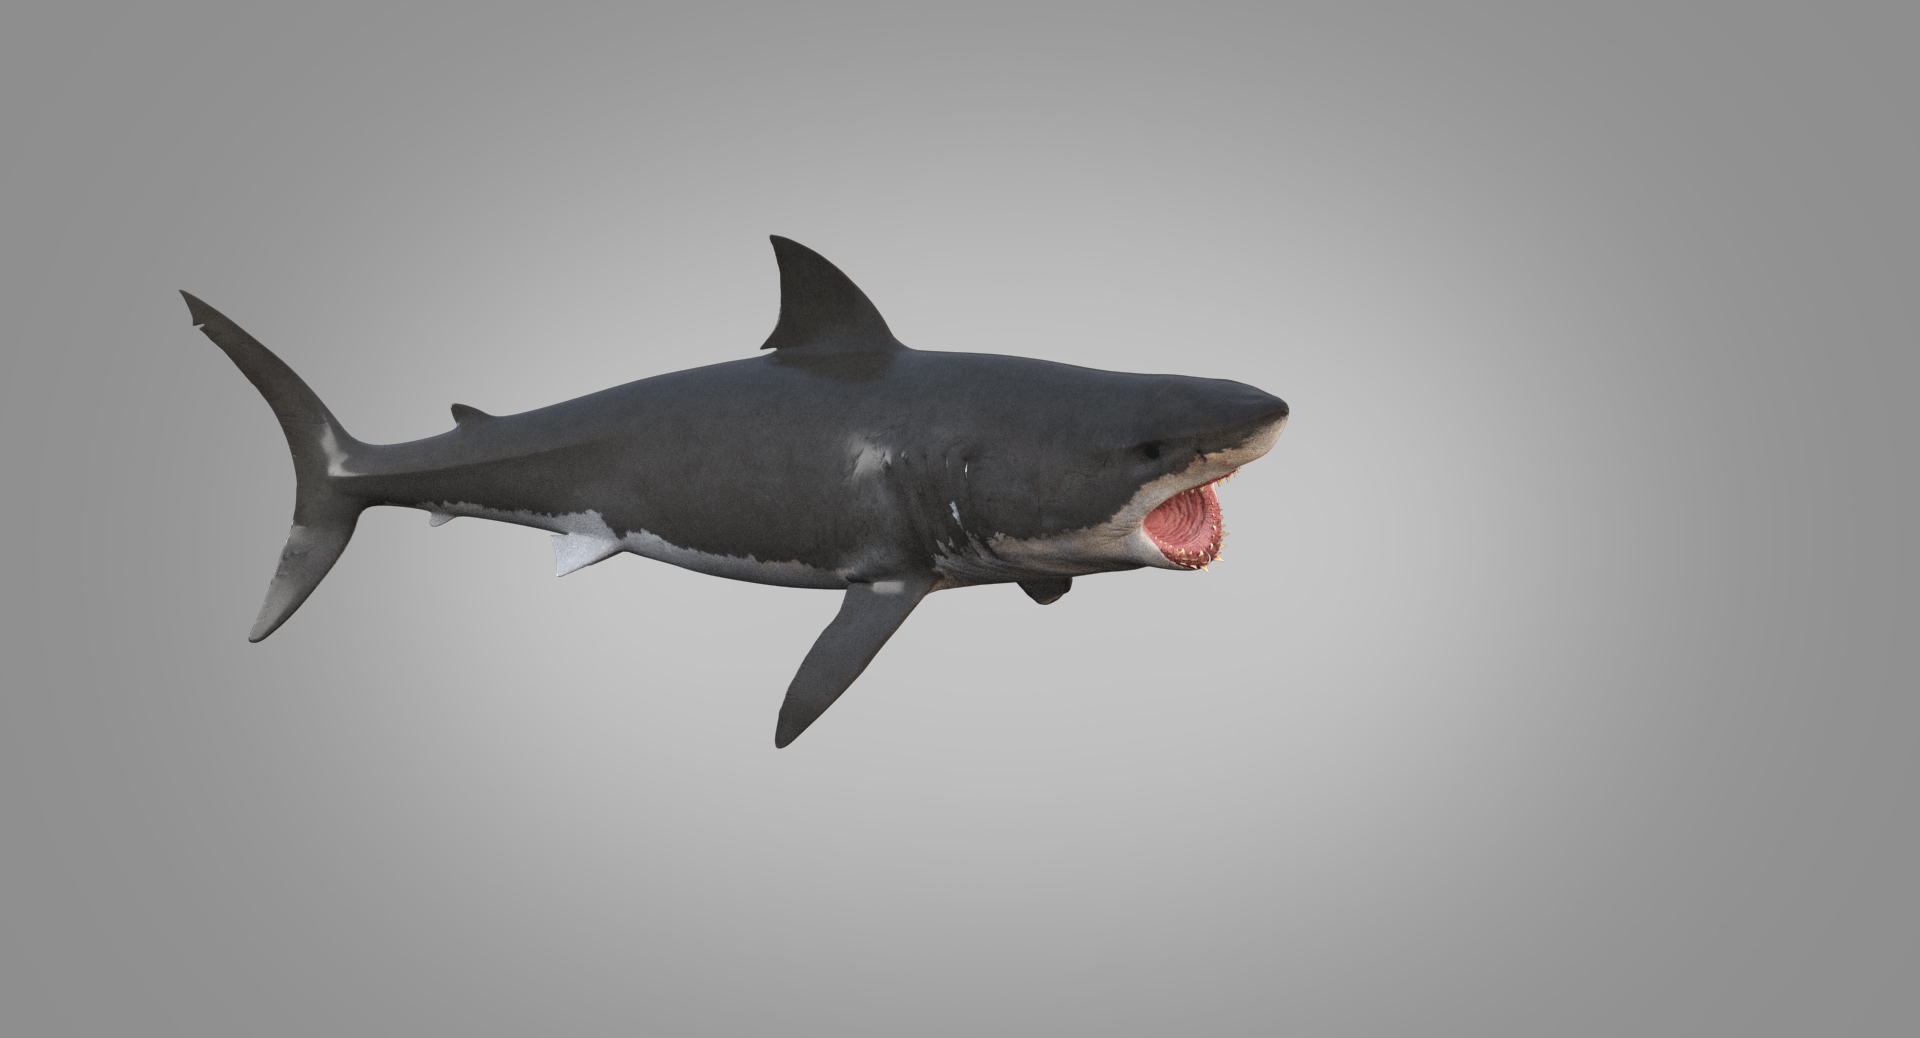 Complete Realistic Shark Model - The Great White Shark (Rigged, Textured,  Easy To Animate)